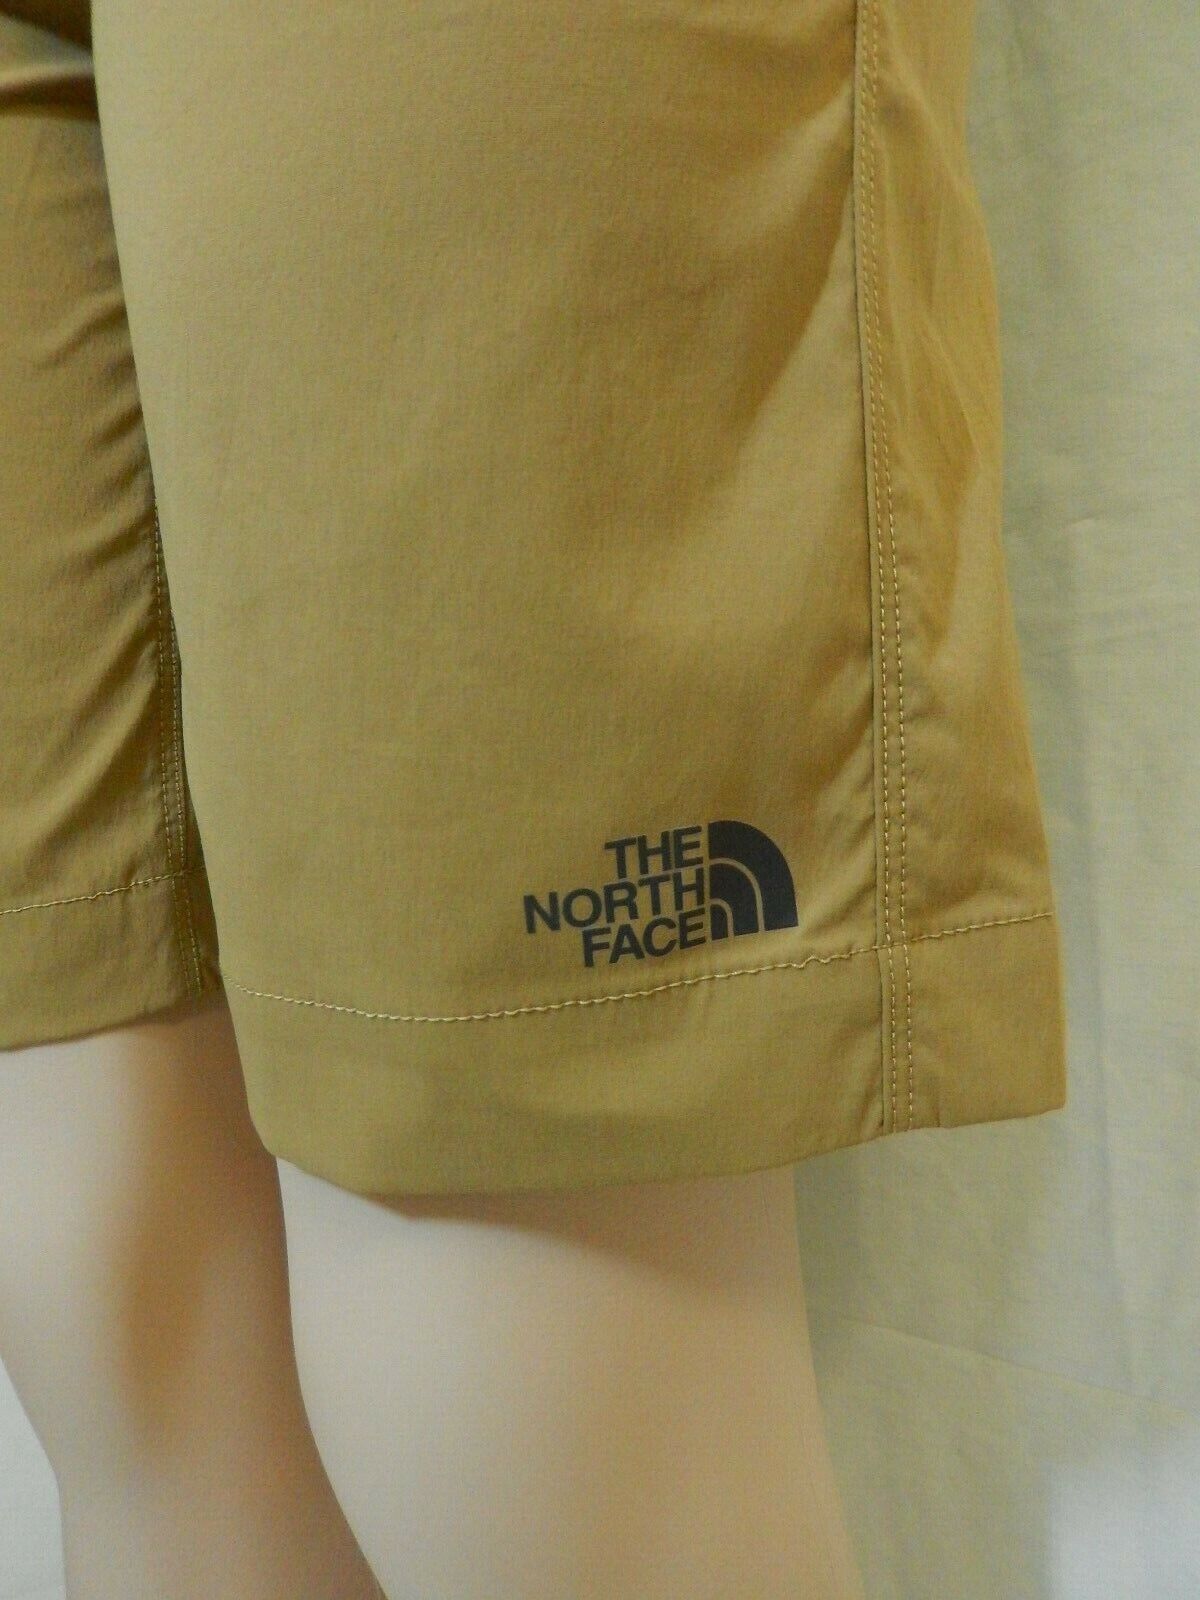 *NWT* THE NORTH FACE YOUTH BOYS TAN NYLON HIKING SPUR TRAIL SHORTS SIZE S(7/8)Y